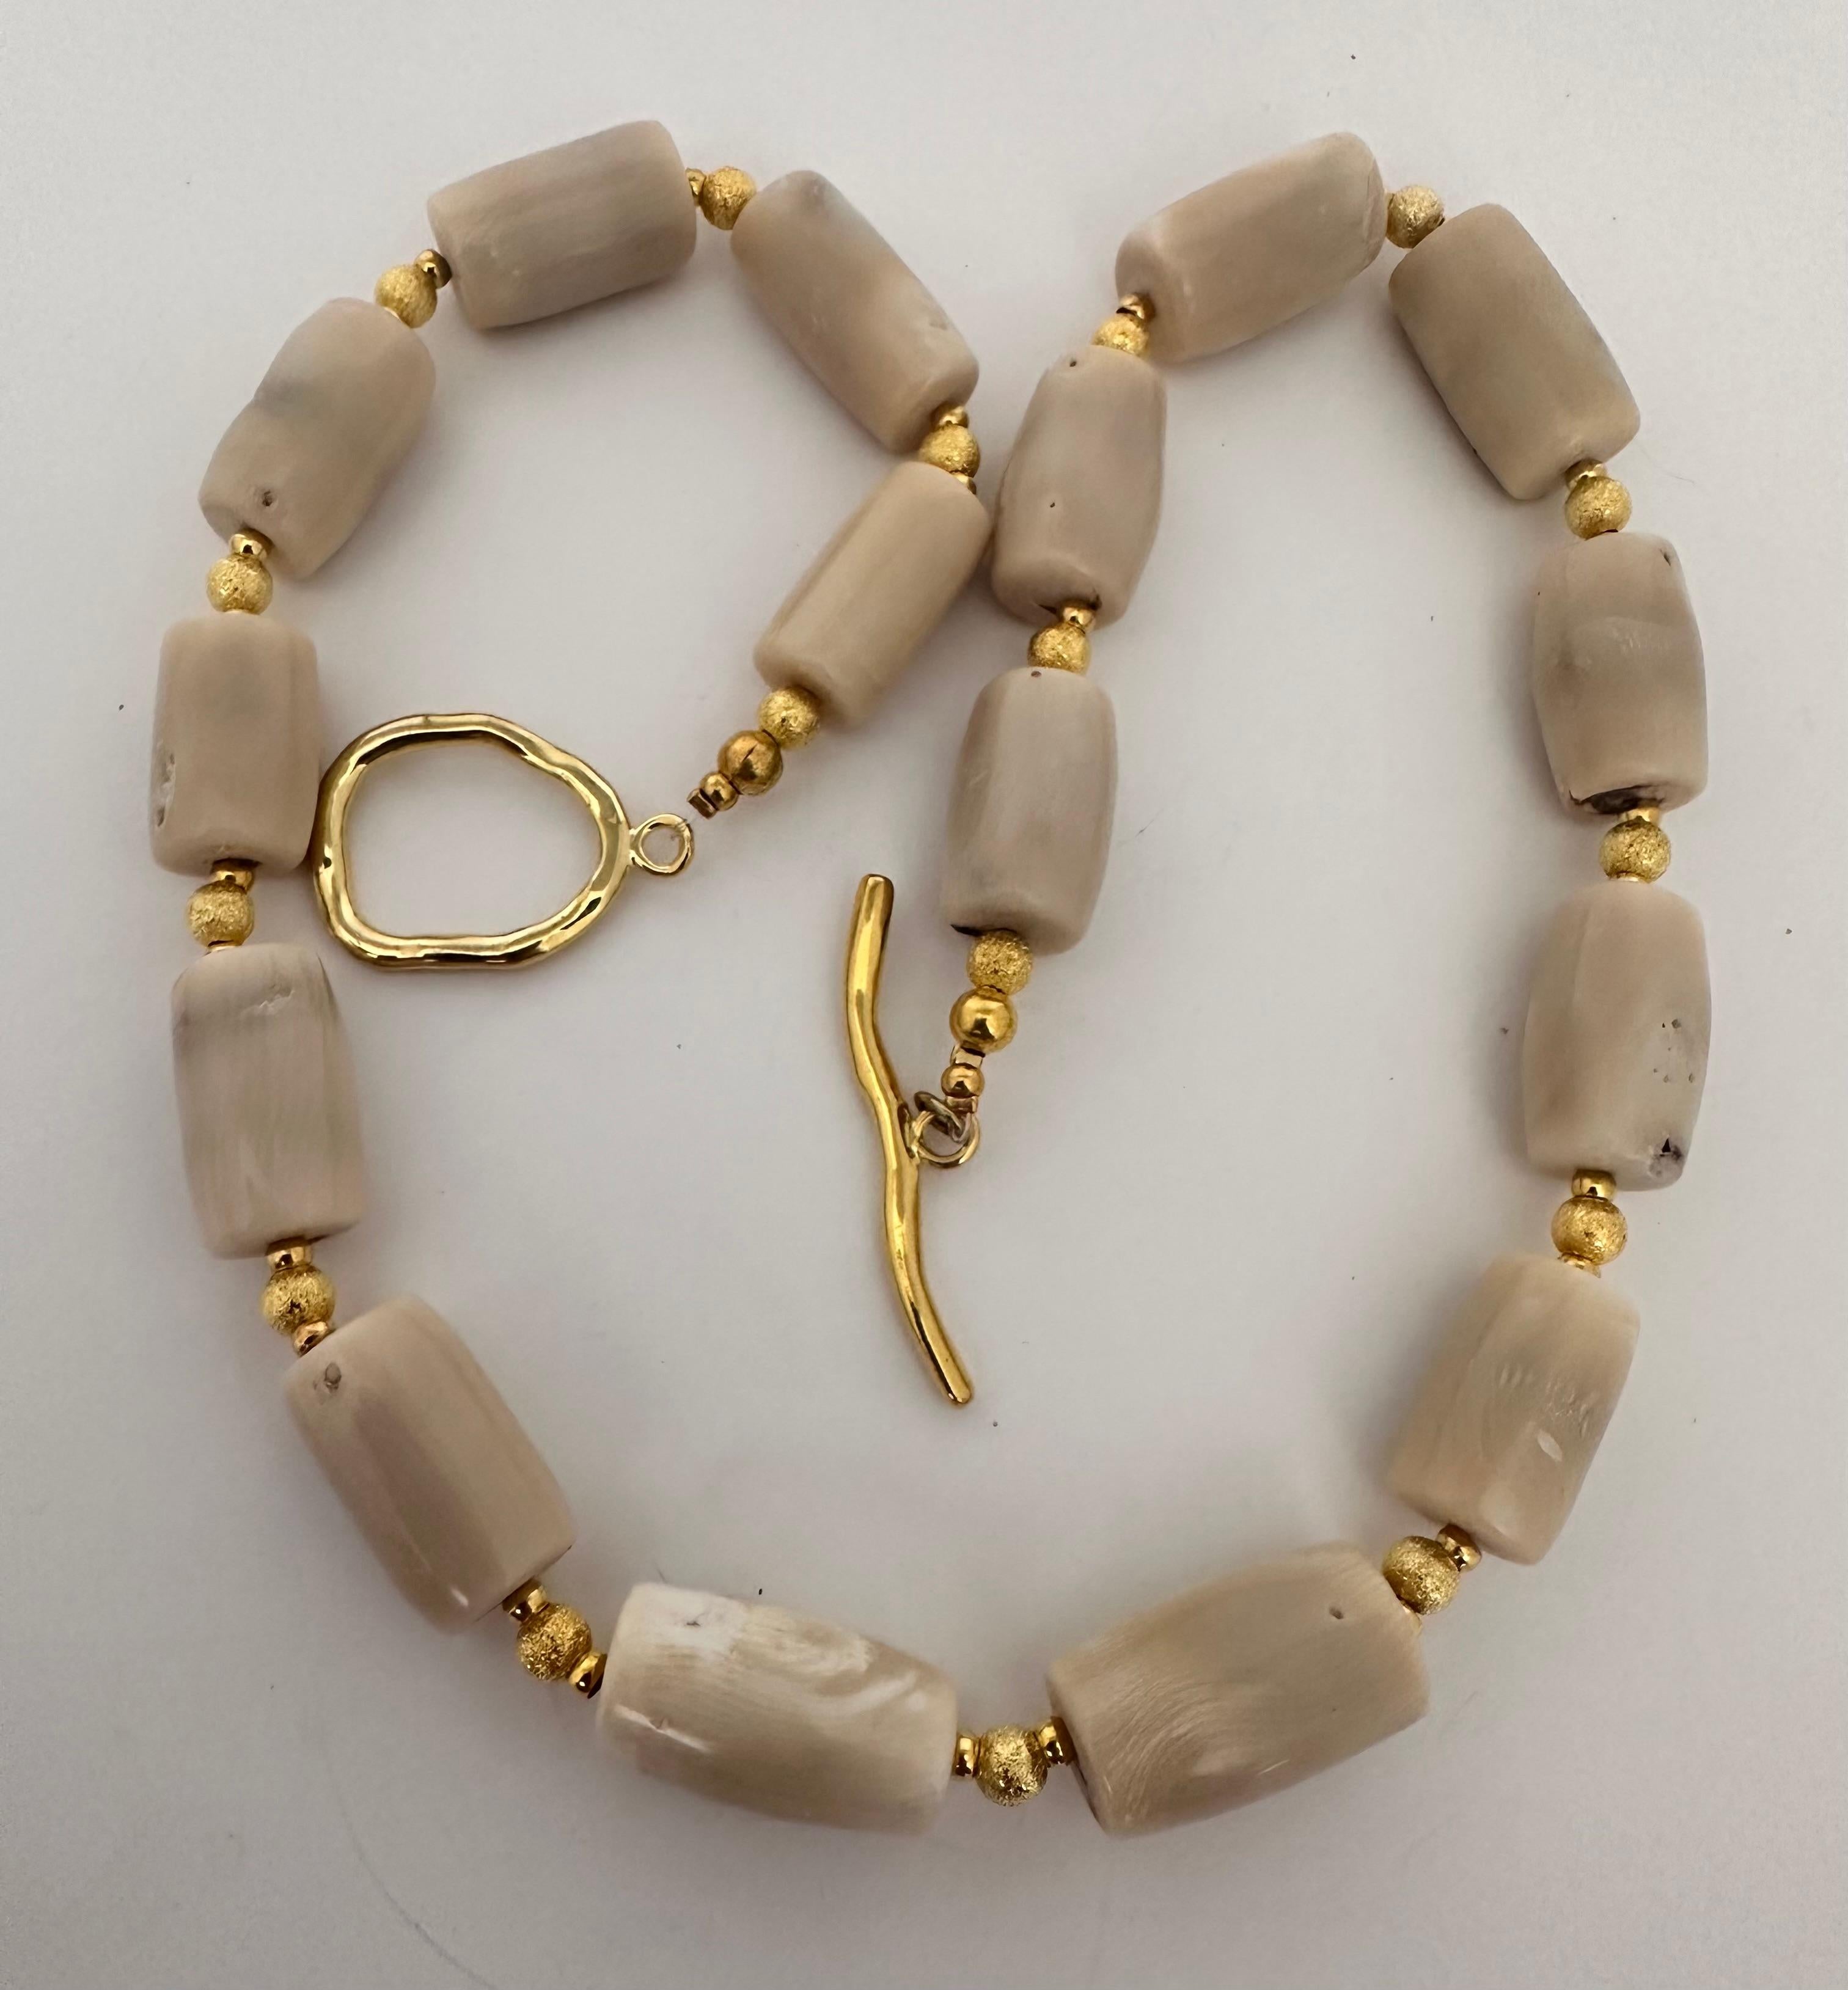 Women's Handmade ~ Gold Beads and White/Beige Coral Barrel Shaped Beaded 25